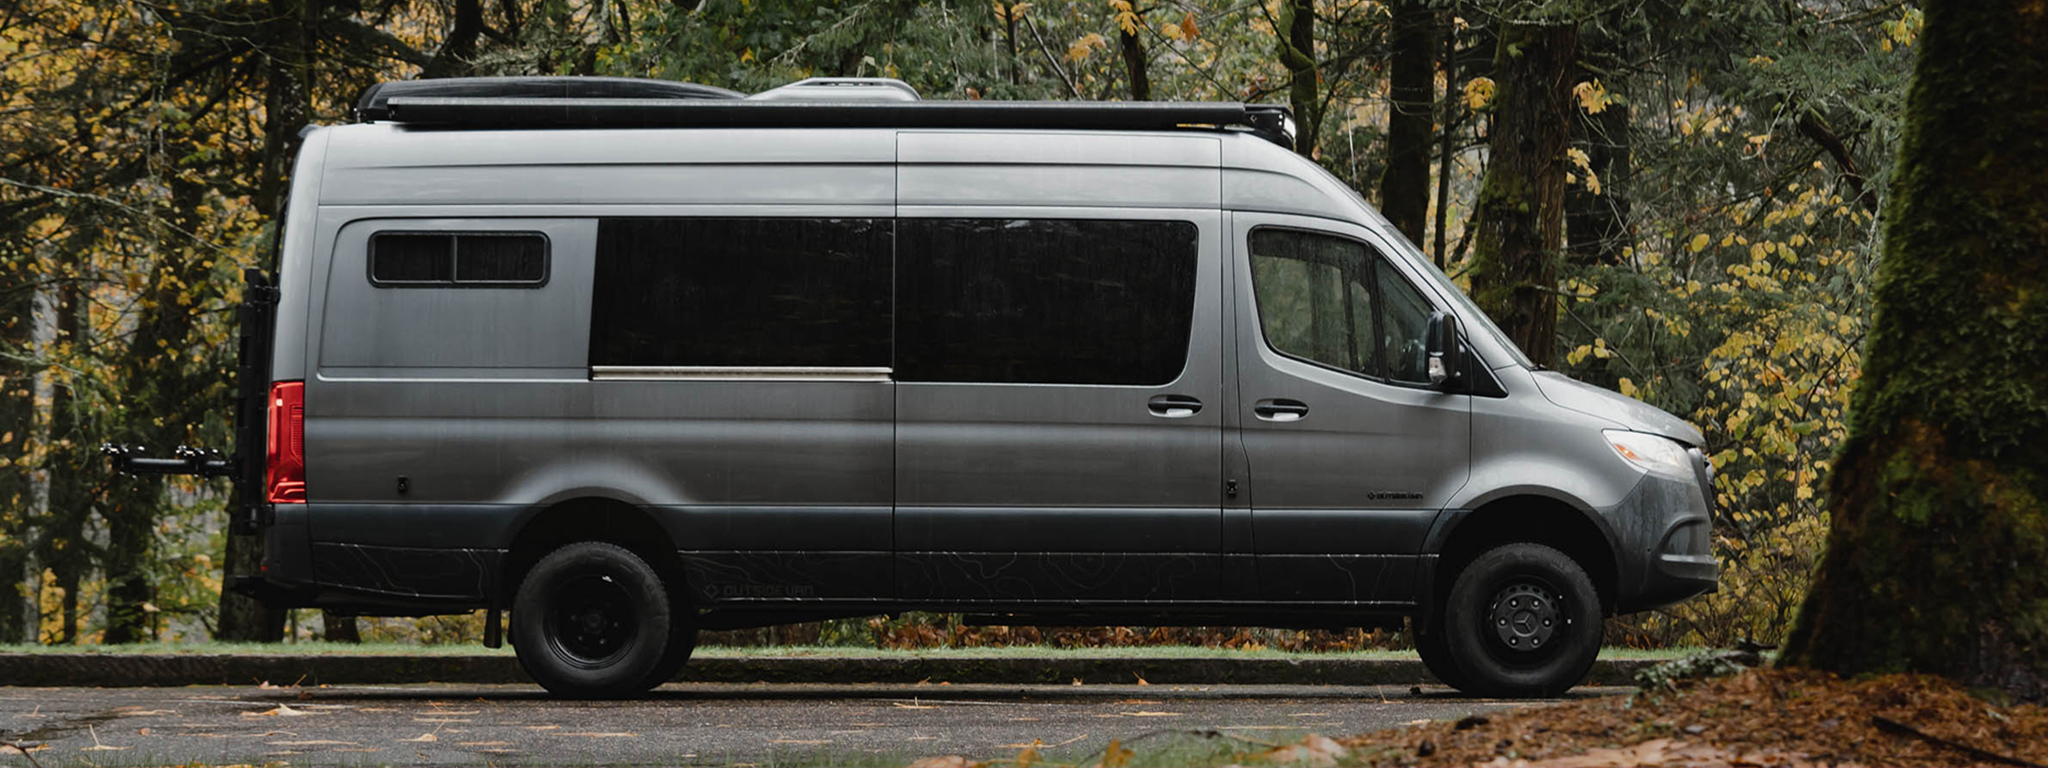 the exterior of a large grey van parked in a dark forest